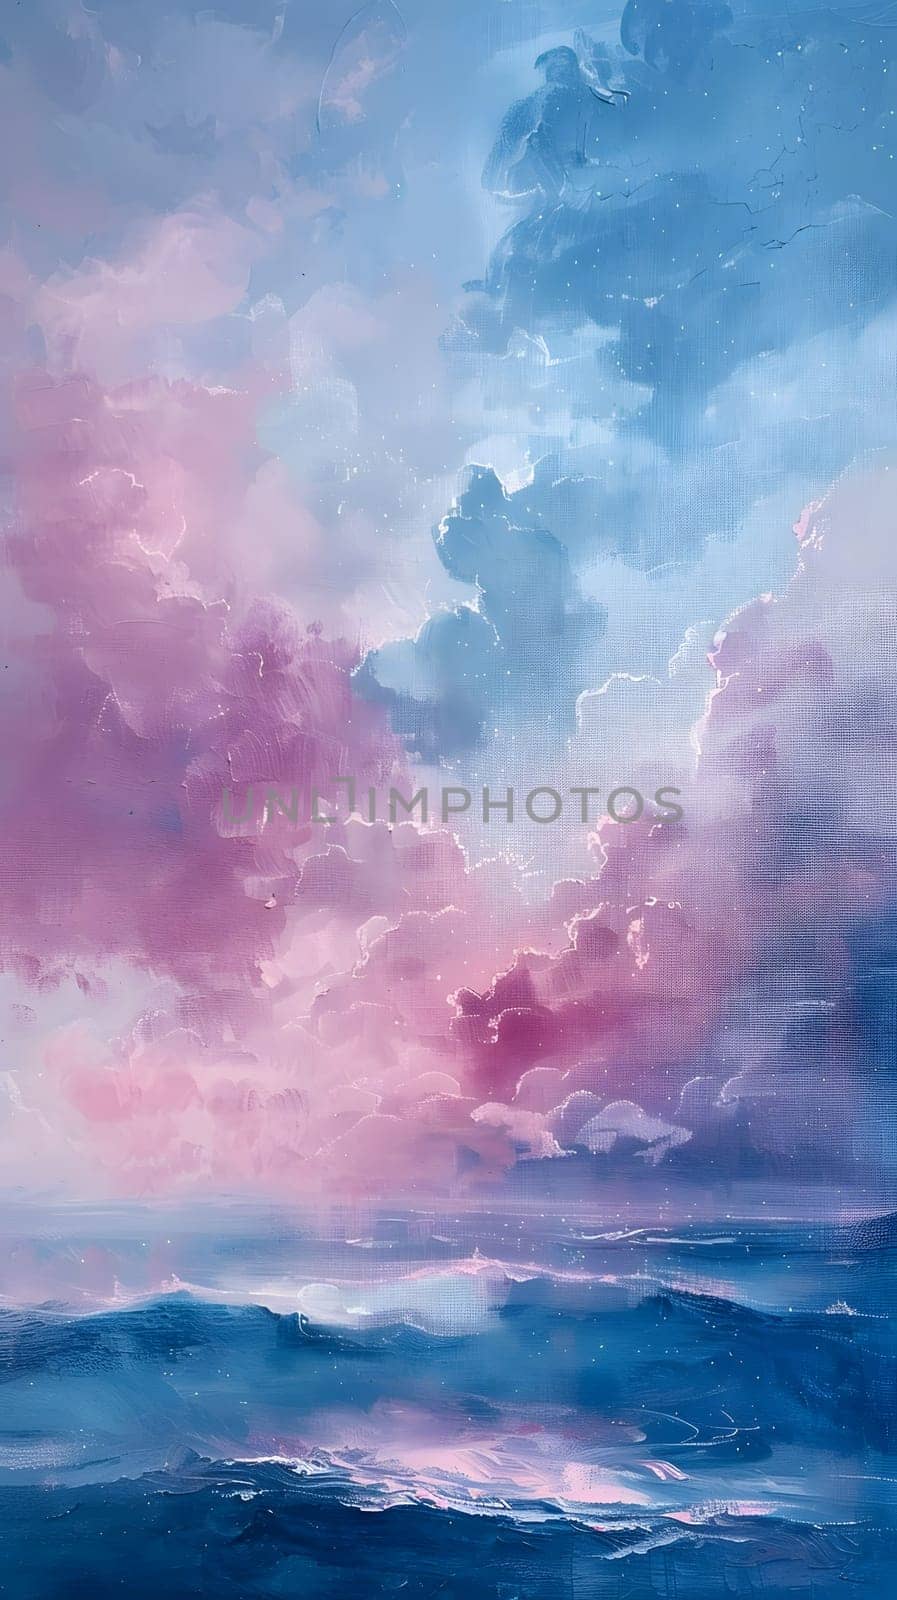 An art piece depicting a vivid azure sky with fluffy pink cumulus clouds reflecting over a serene body of liquid water, capturing a tranquil atmospheric phenomenon